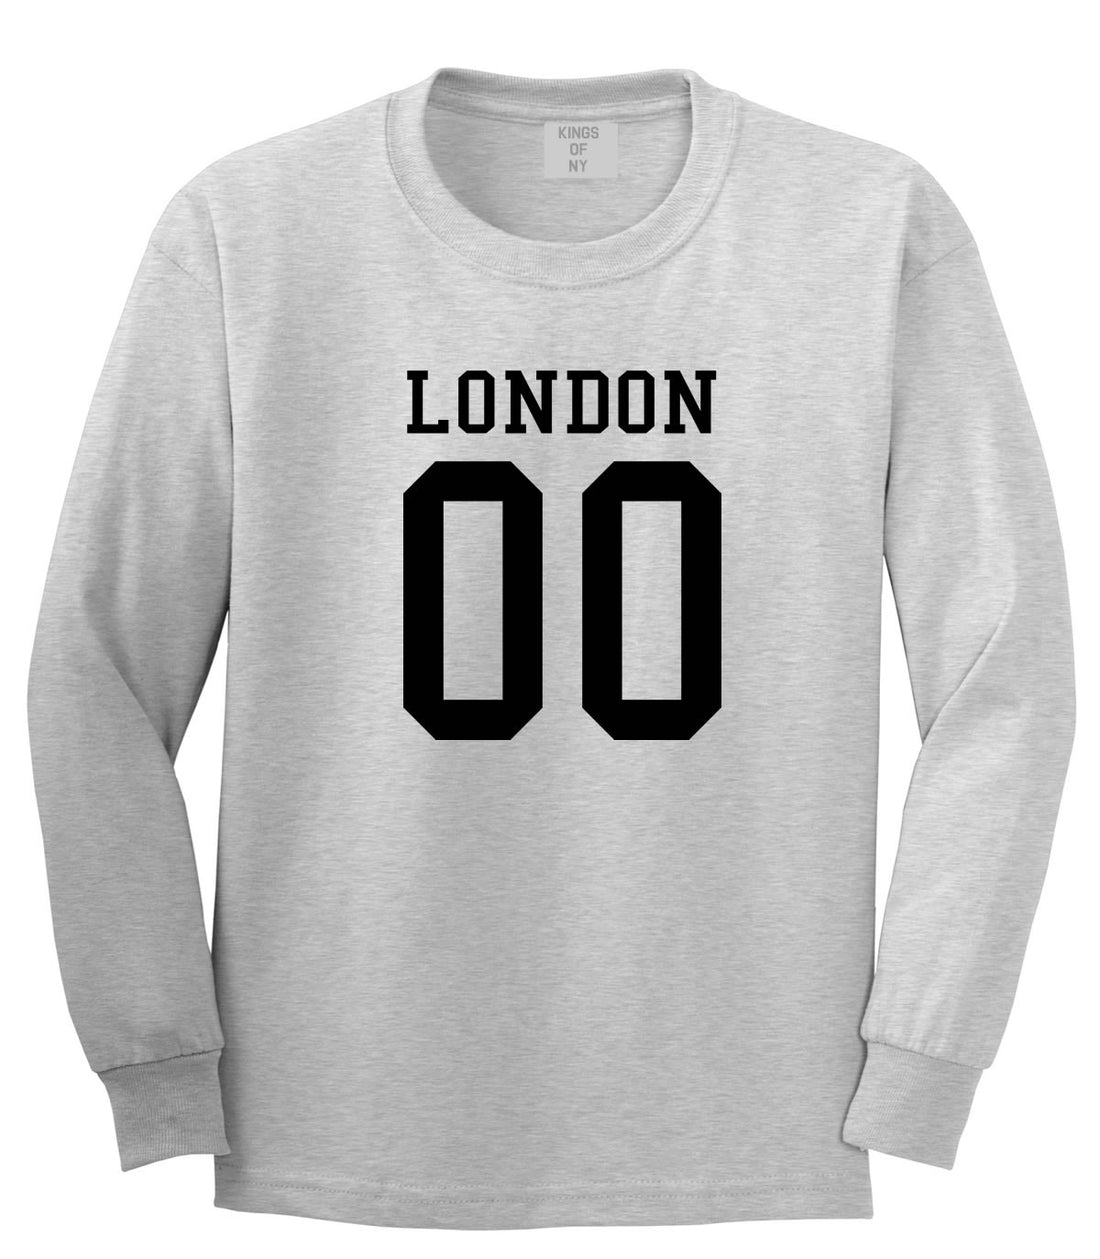 London Team 00 Jersey Long Sleeve T-Shirt in Grey By Kings Of NY